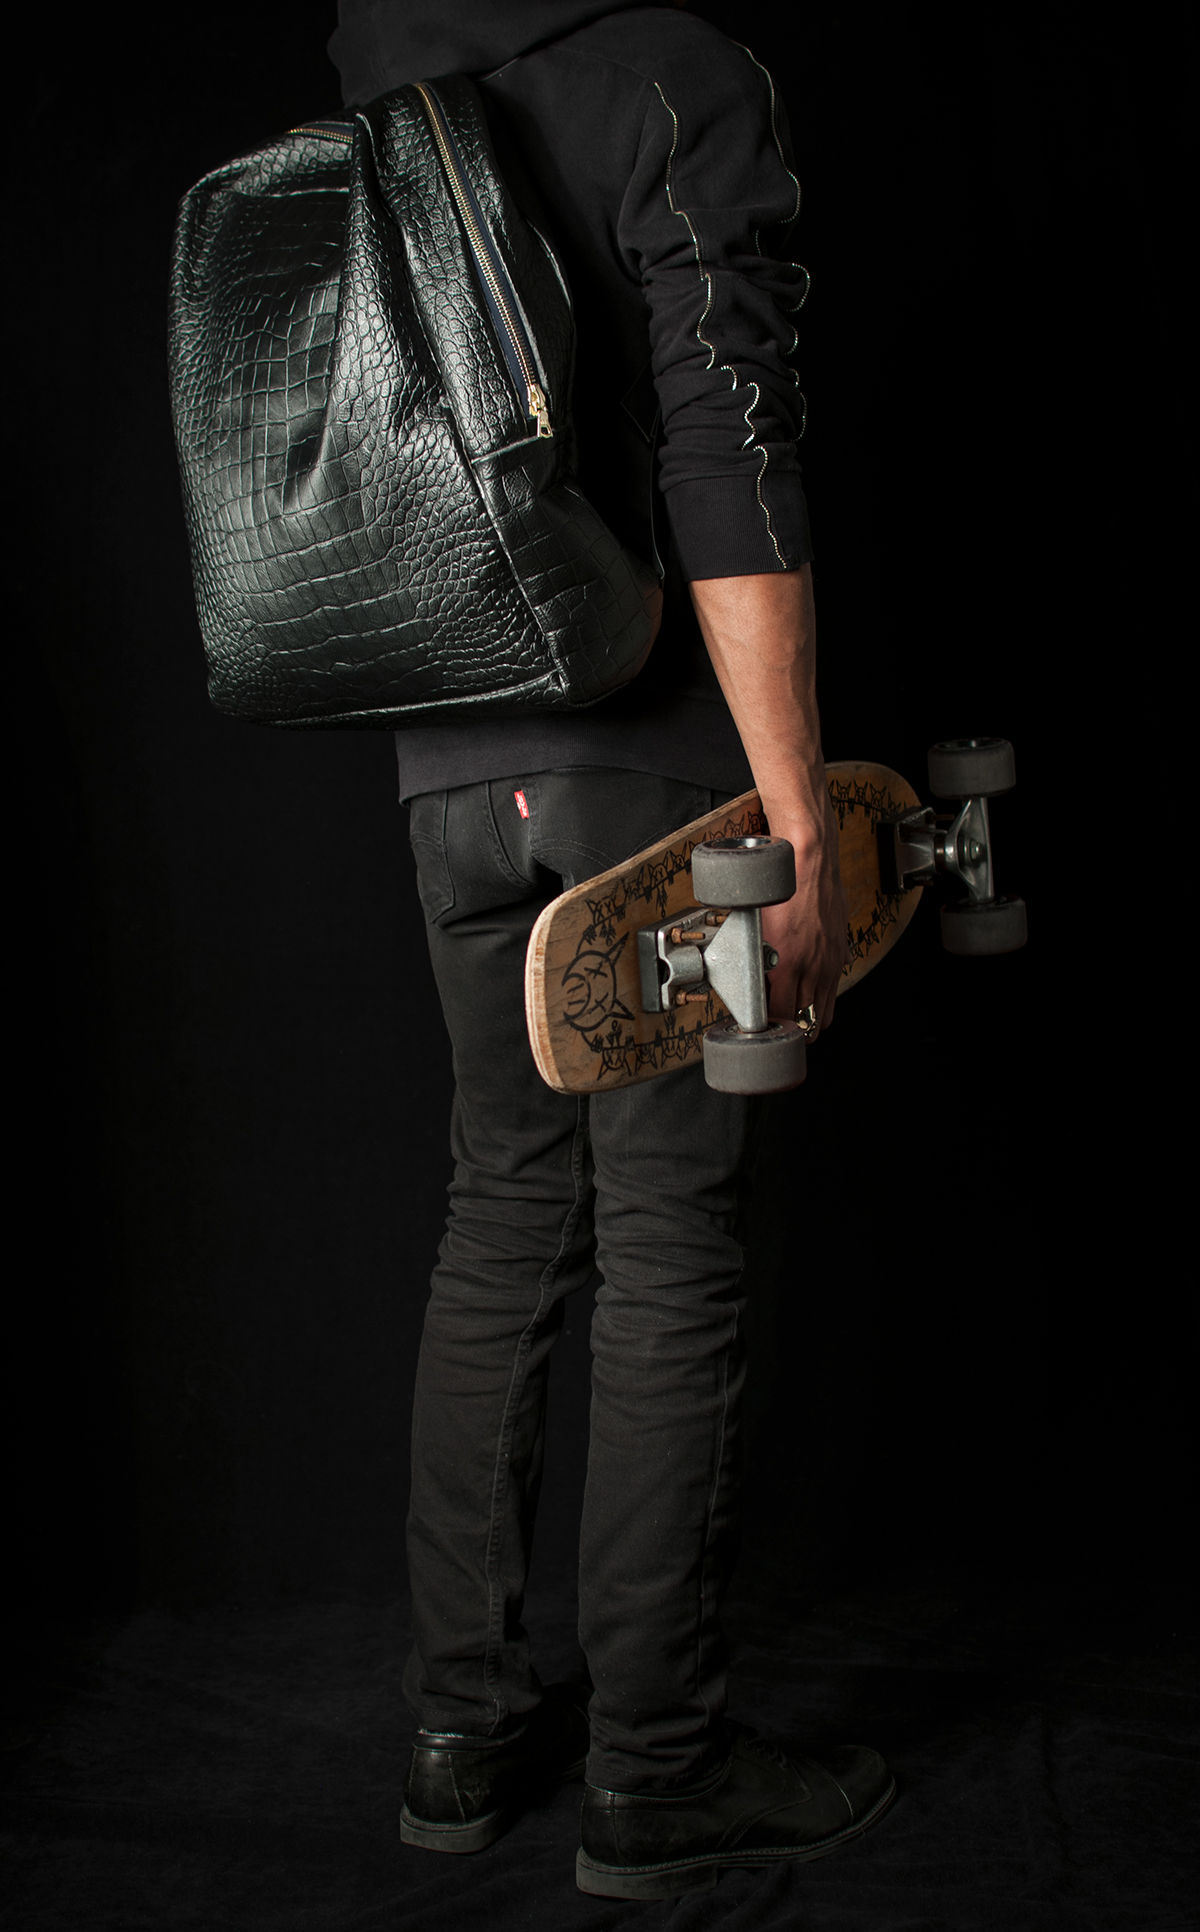 Studio Photography lighting Style leather accessories handbags bags backpack streetwear skateboard Dogtown